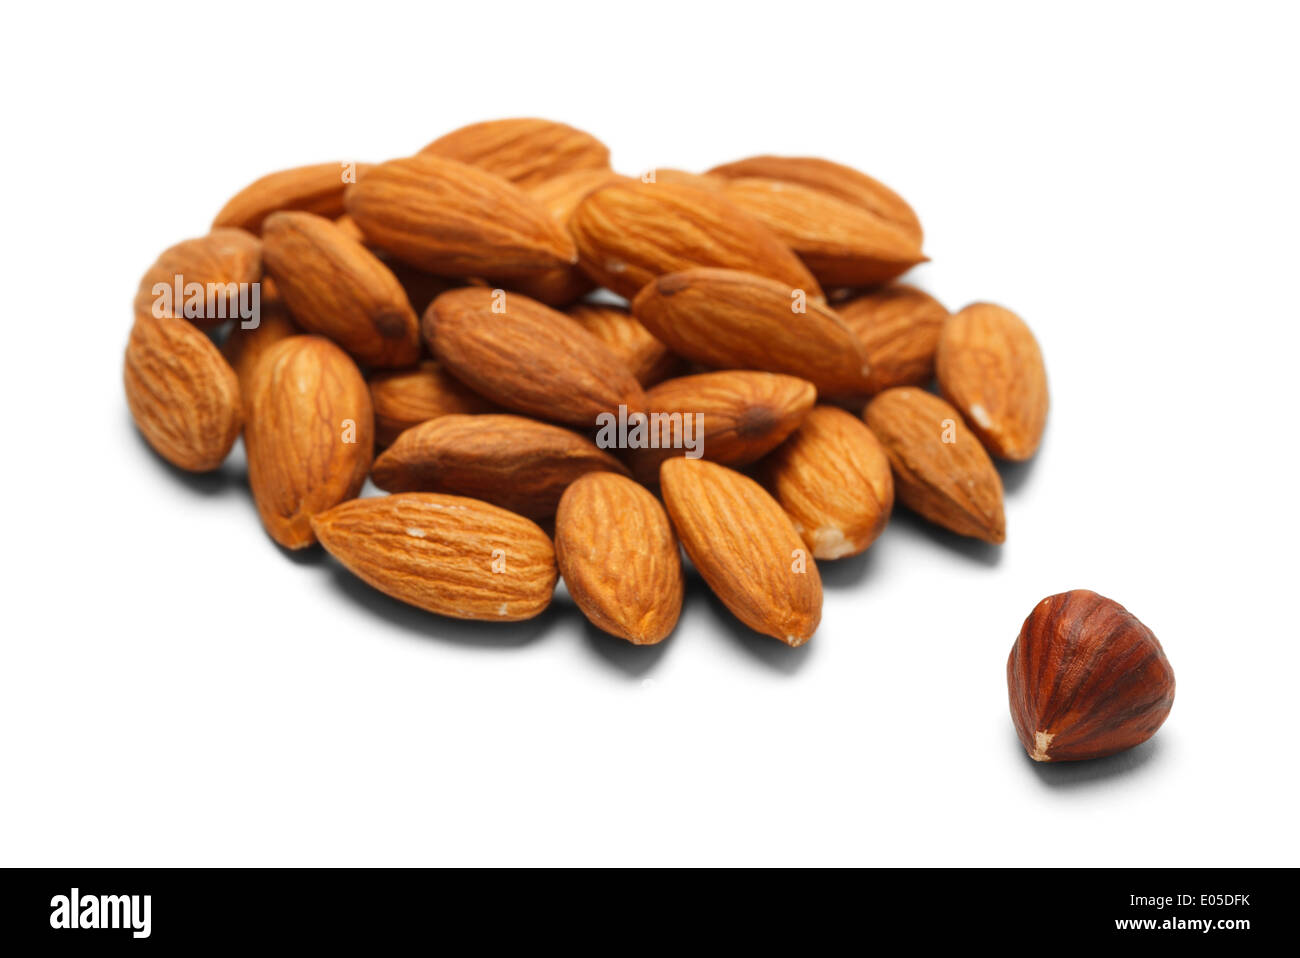 Group of Almonds with a Single Different Nut. Isolated on White Background. Stock Photo